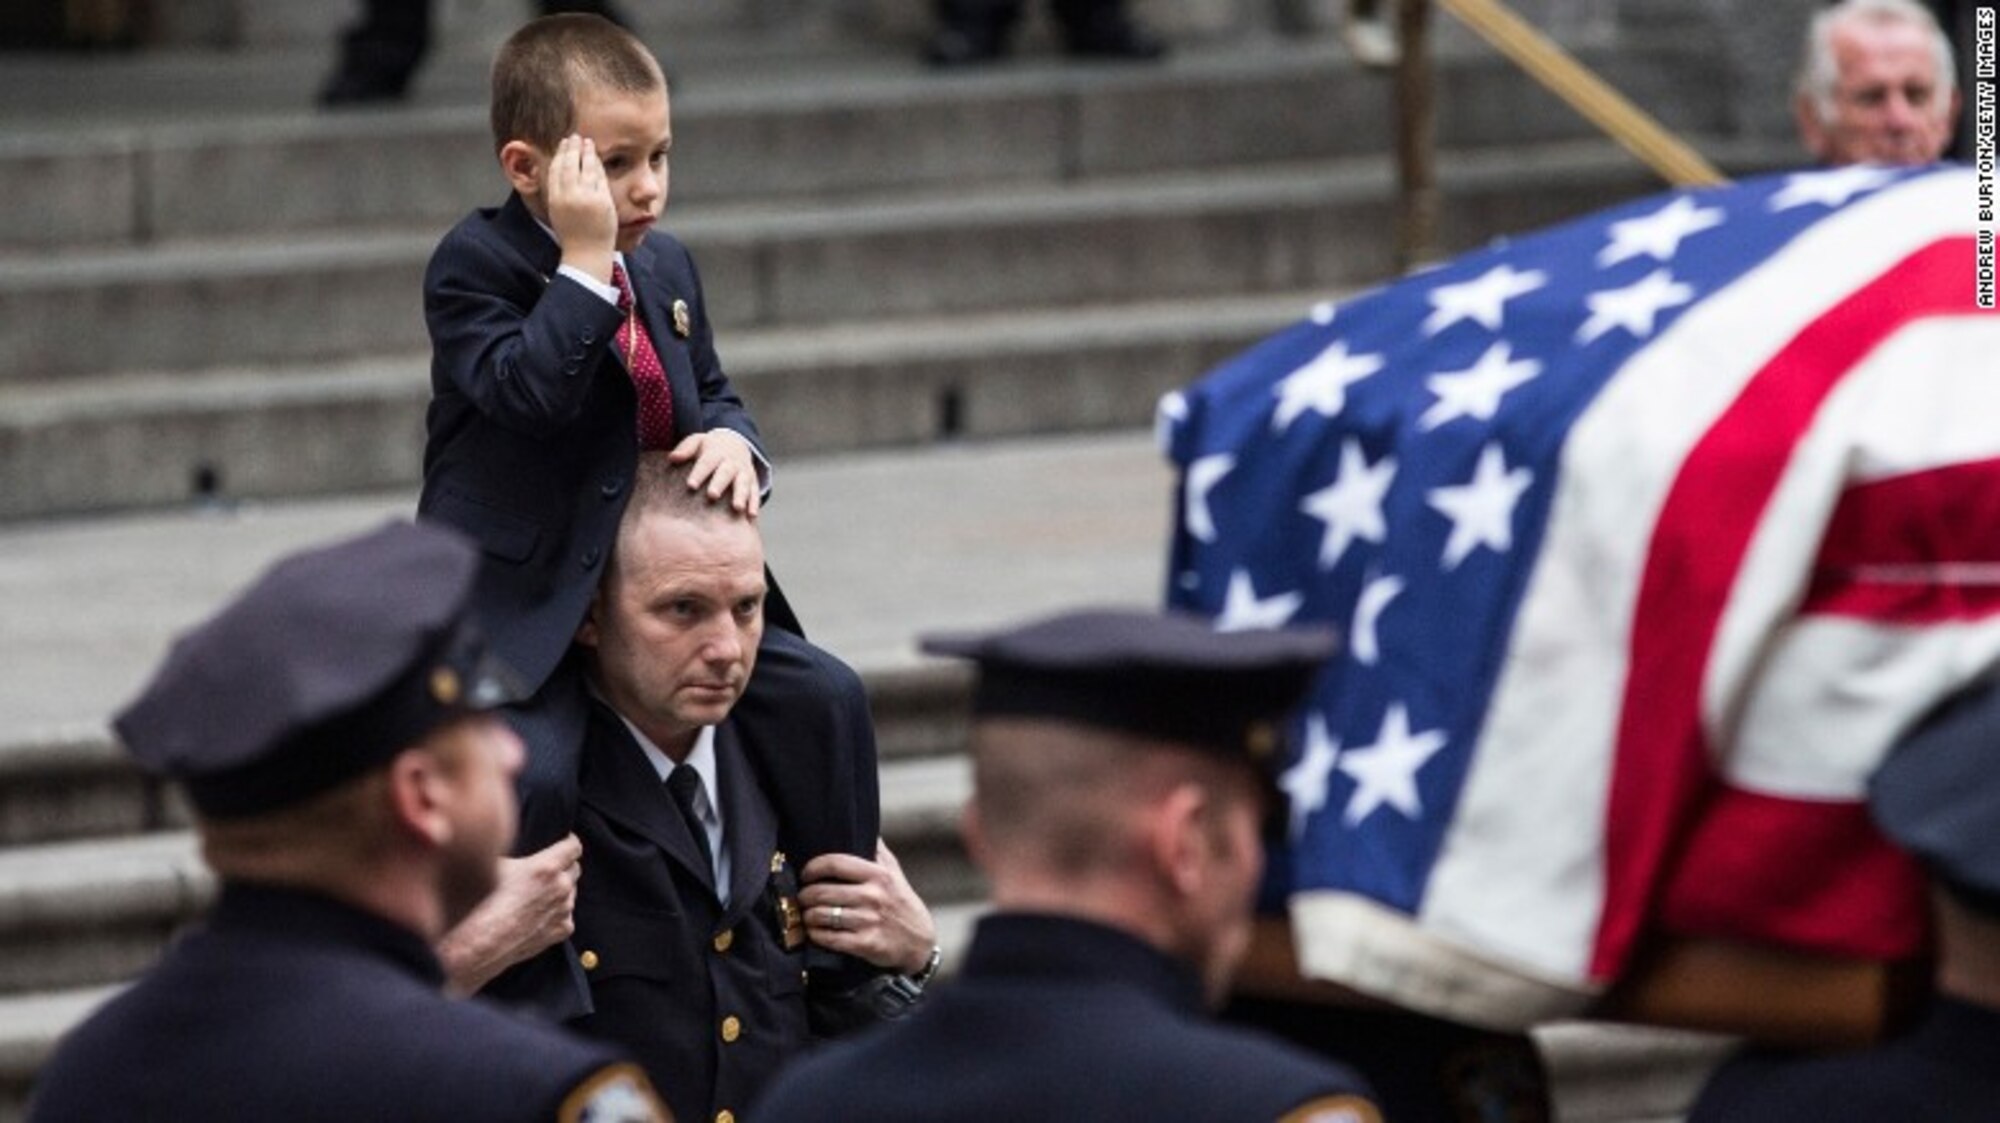 Ryan Lemm, salutes his father, Tech. Sgt. Joseph Lemm’s casket, Dec. 28, 2015, during Lemm’s funeral in Manhattan, NY. While Lemm was a member of the 105th Base Defense Squadron, the unit trains closely and often deploys with the 820th Base Defense Group. Due to the high-stress training and deployments, the lines begin to blur and these Airmen become close-knit families. (Courtesy photo)